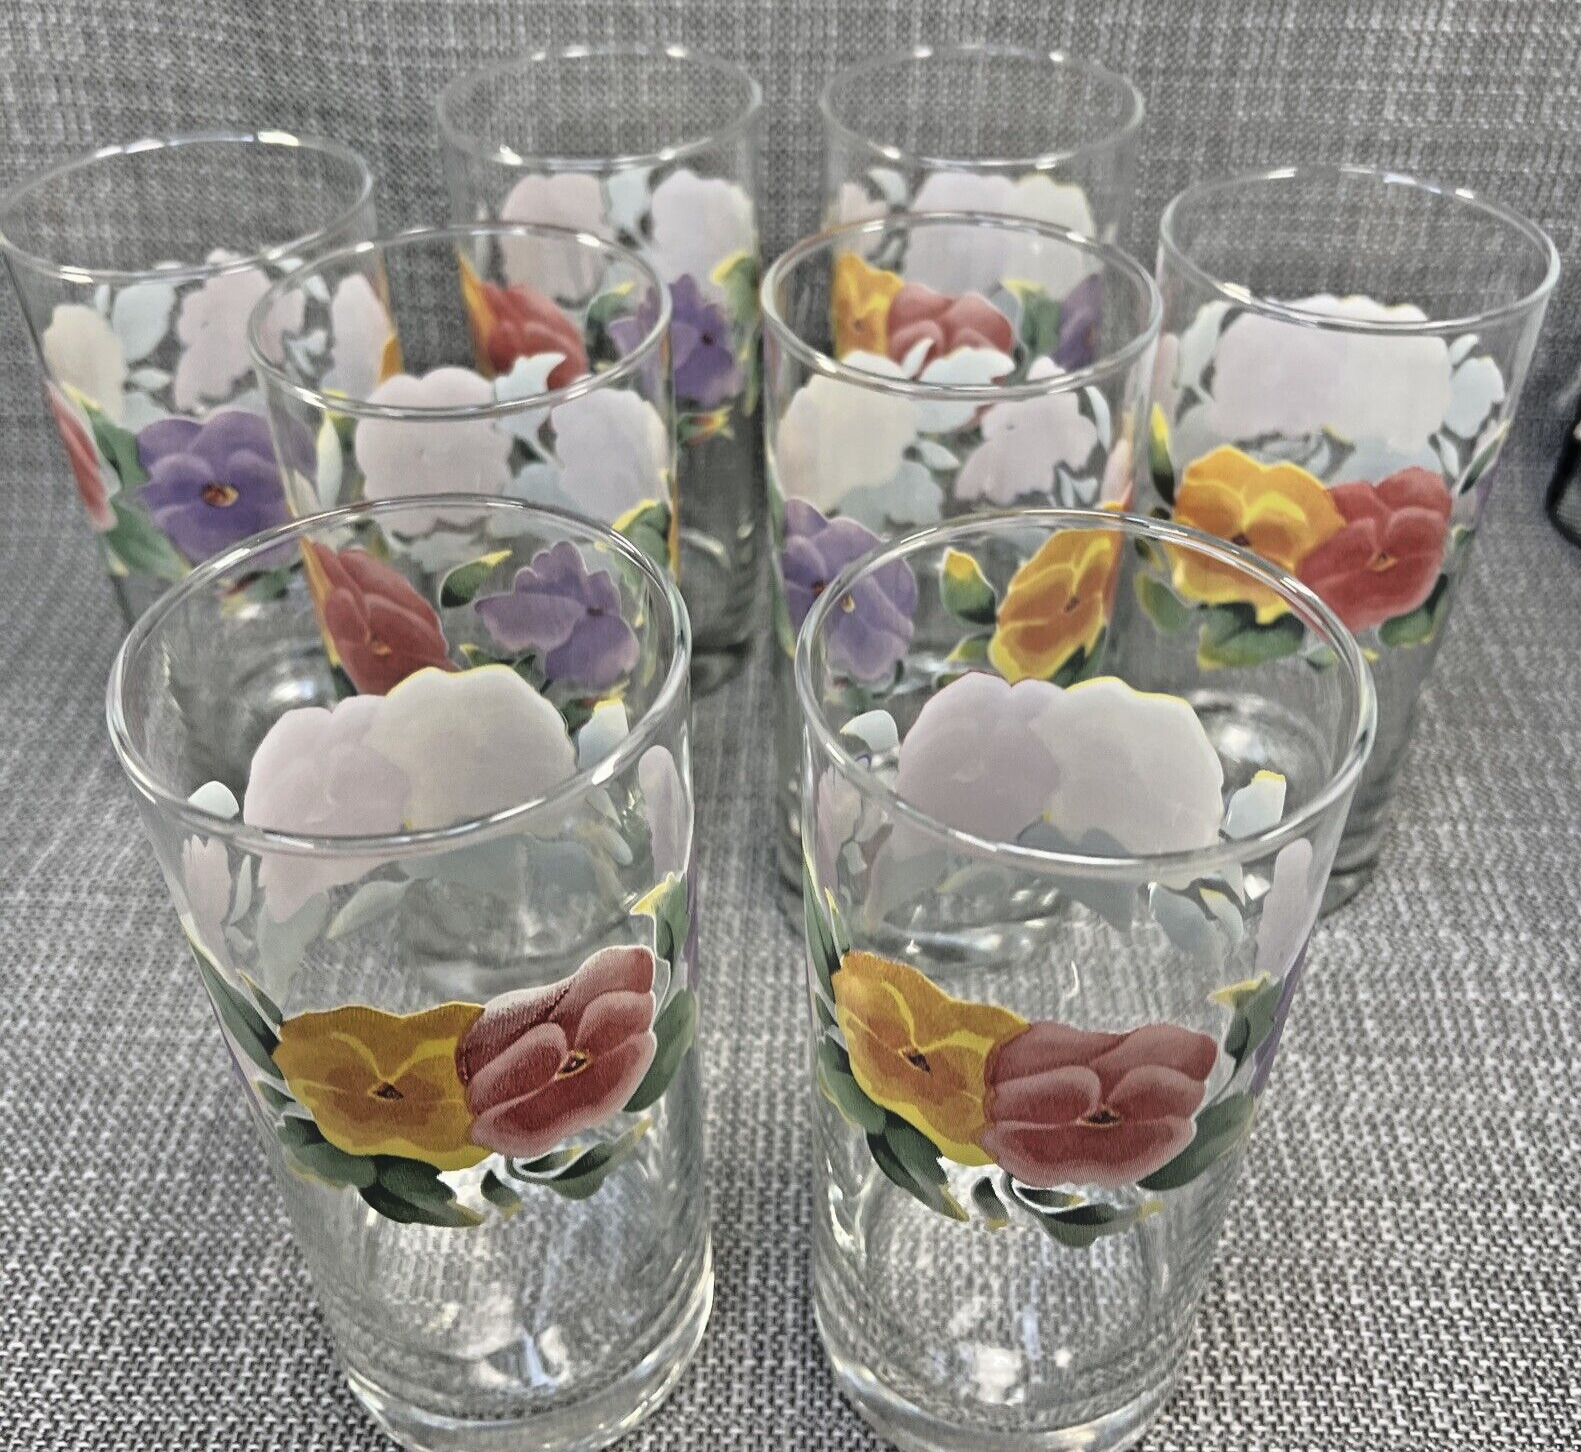 8 Corelle Summer Blush Pansies Glass Tumblers 16 oz 6 inches Tall Corning